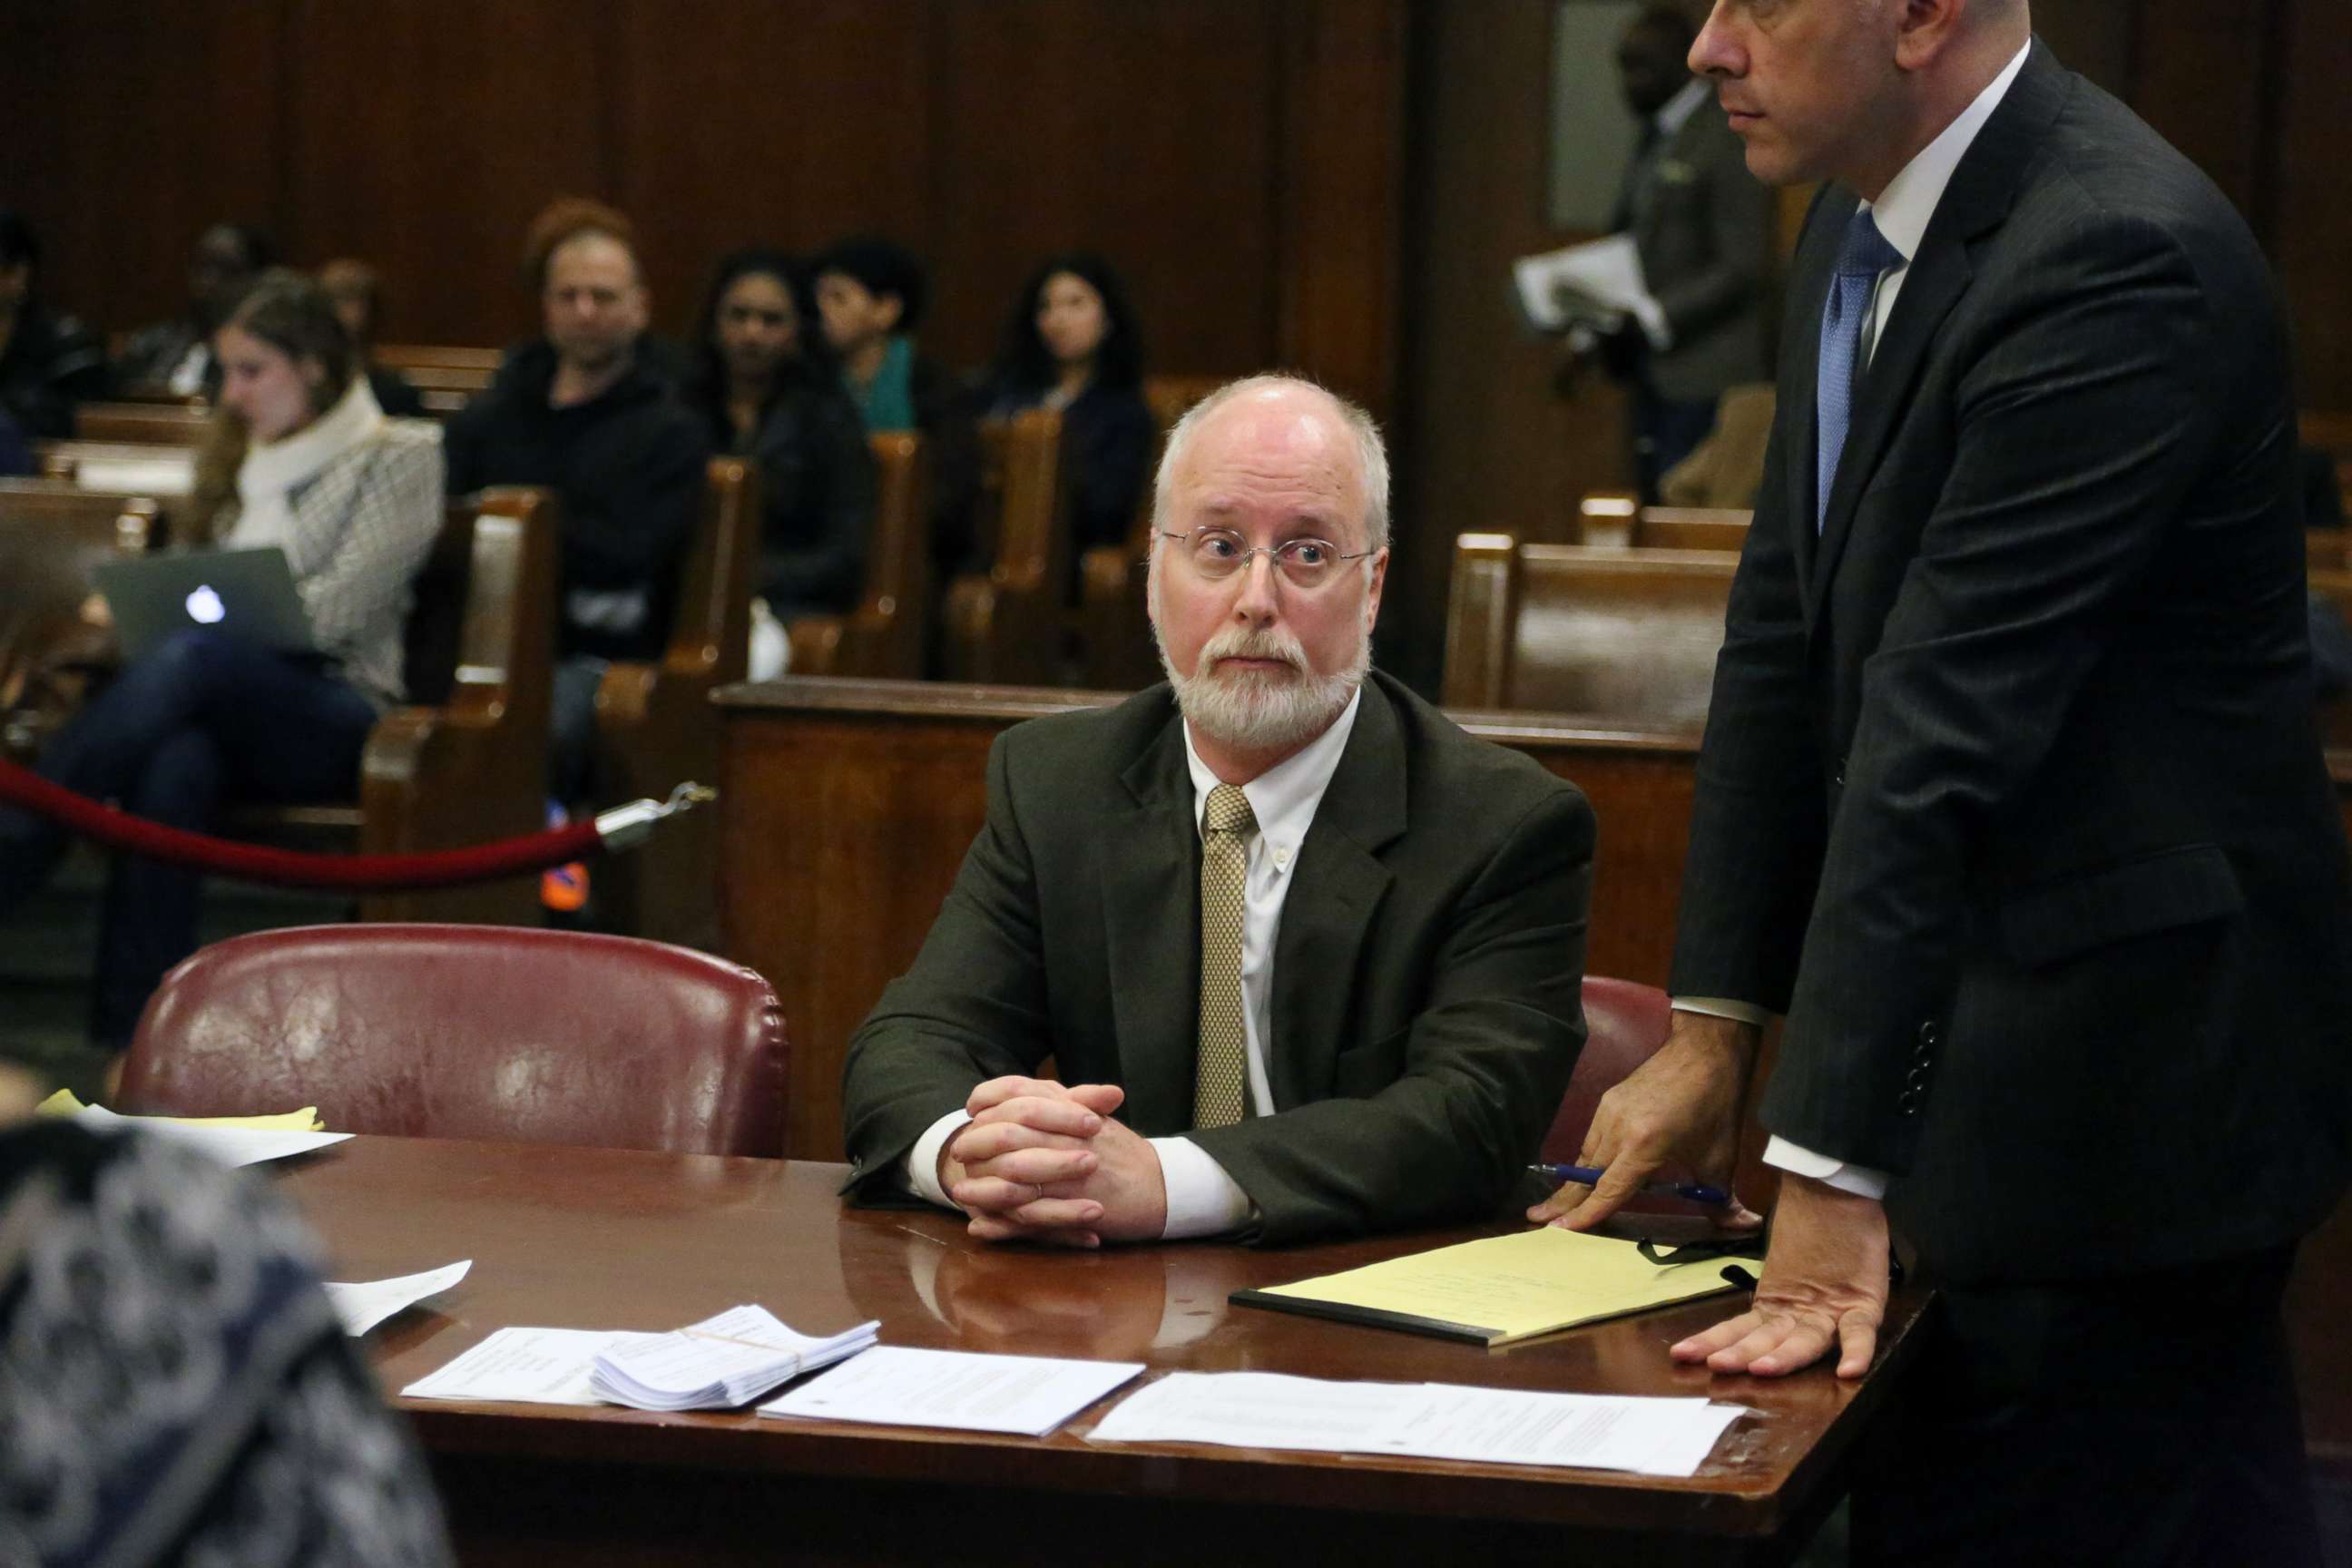 PHOTO: In this Nov. 6, 2014, file photo, Dr. Robert Hadden appears in Manhattan Supreme Court in New York.